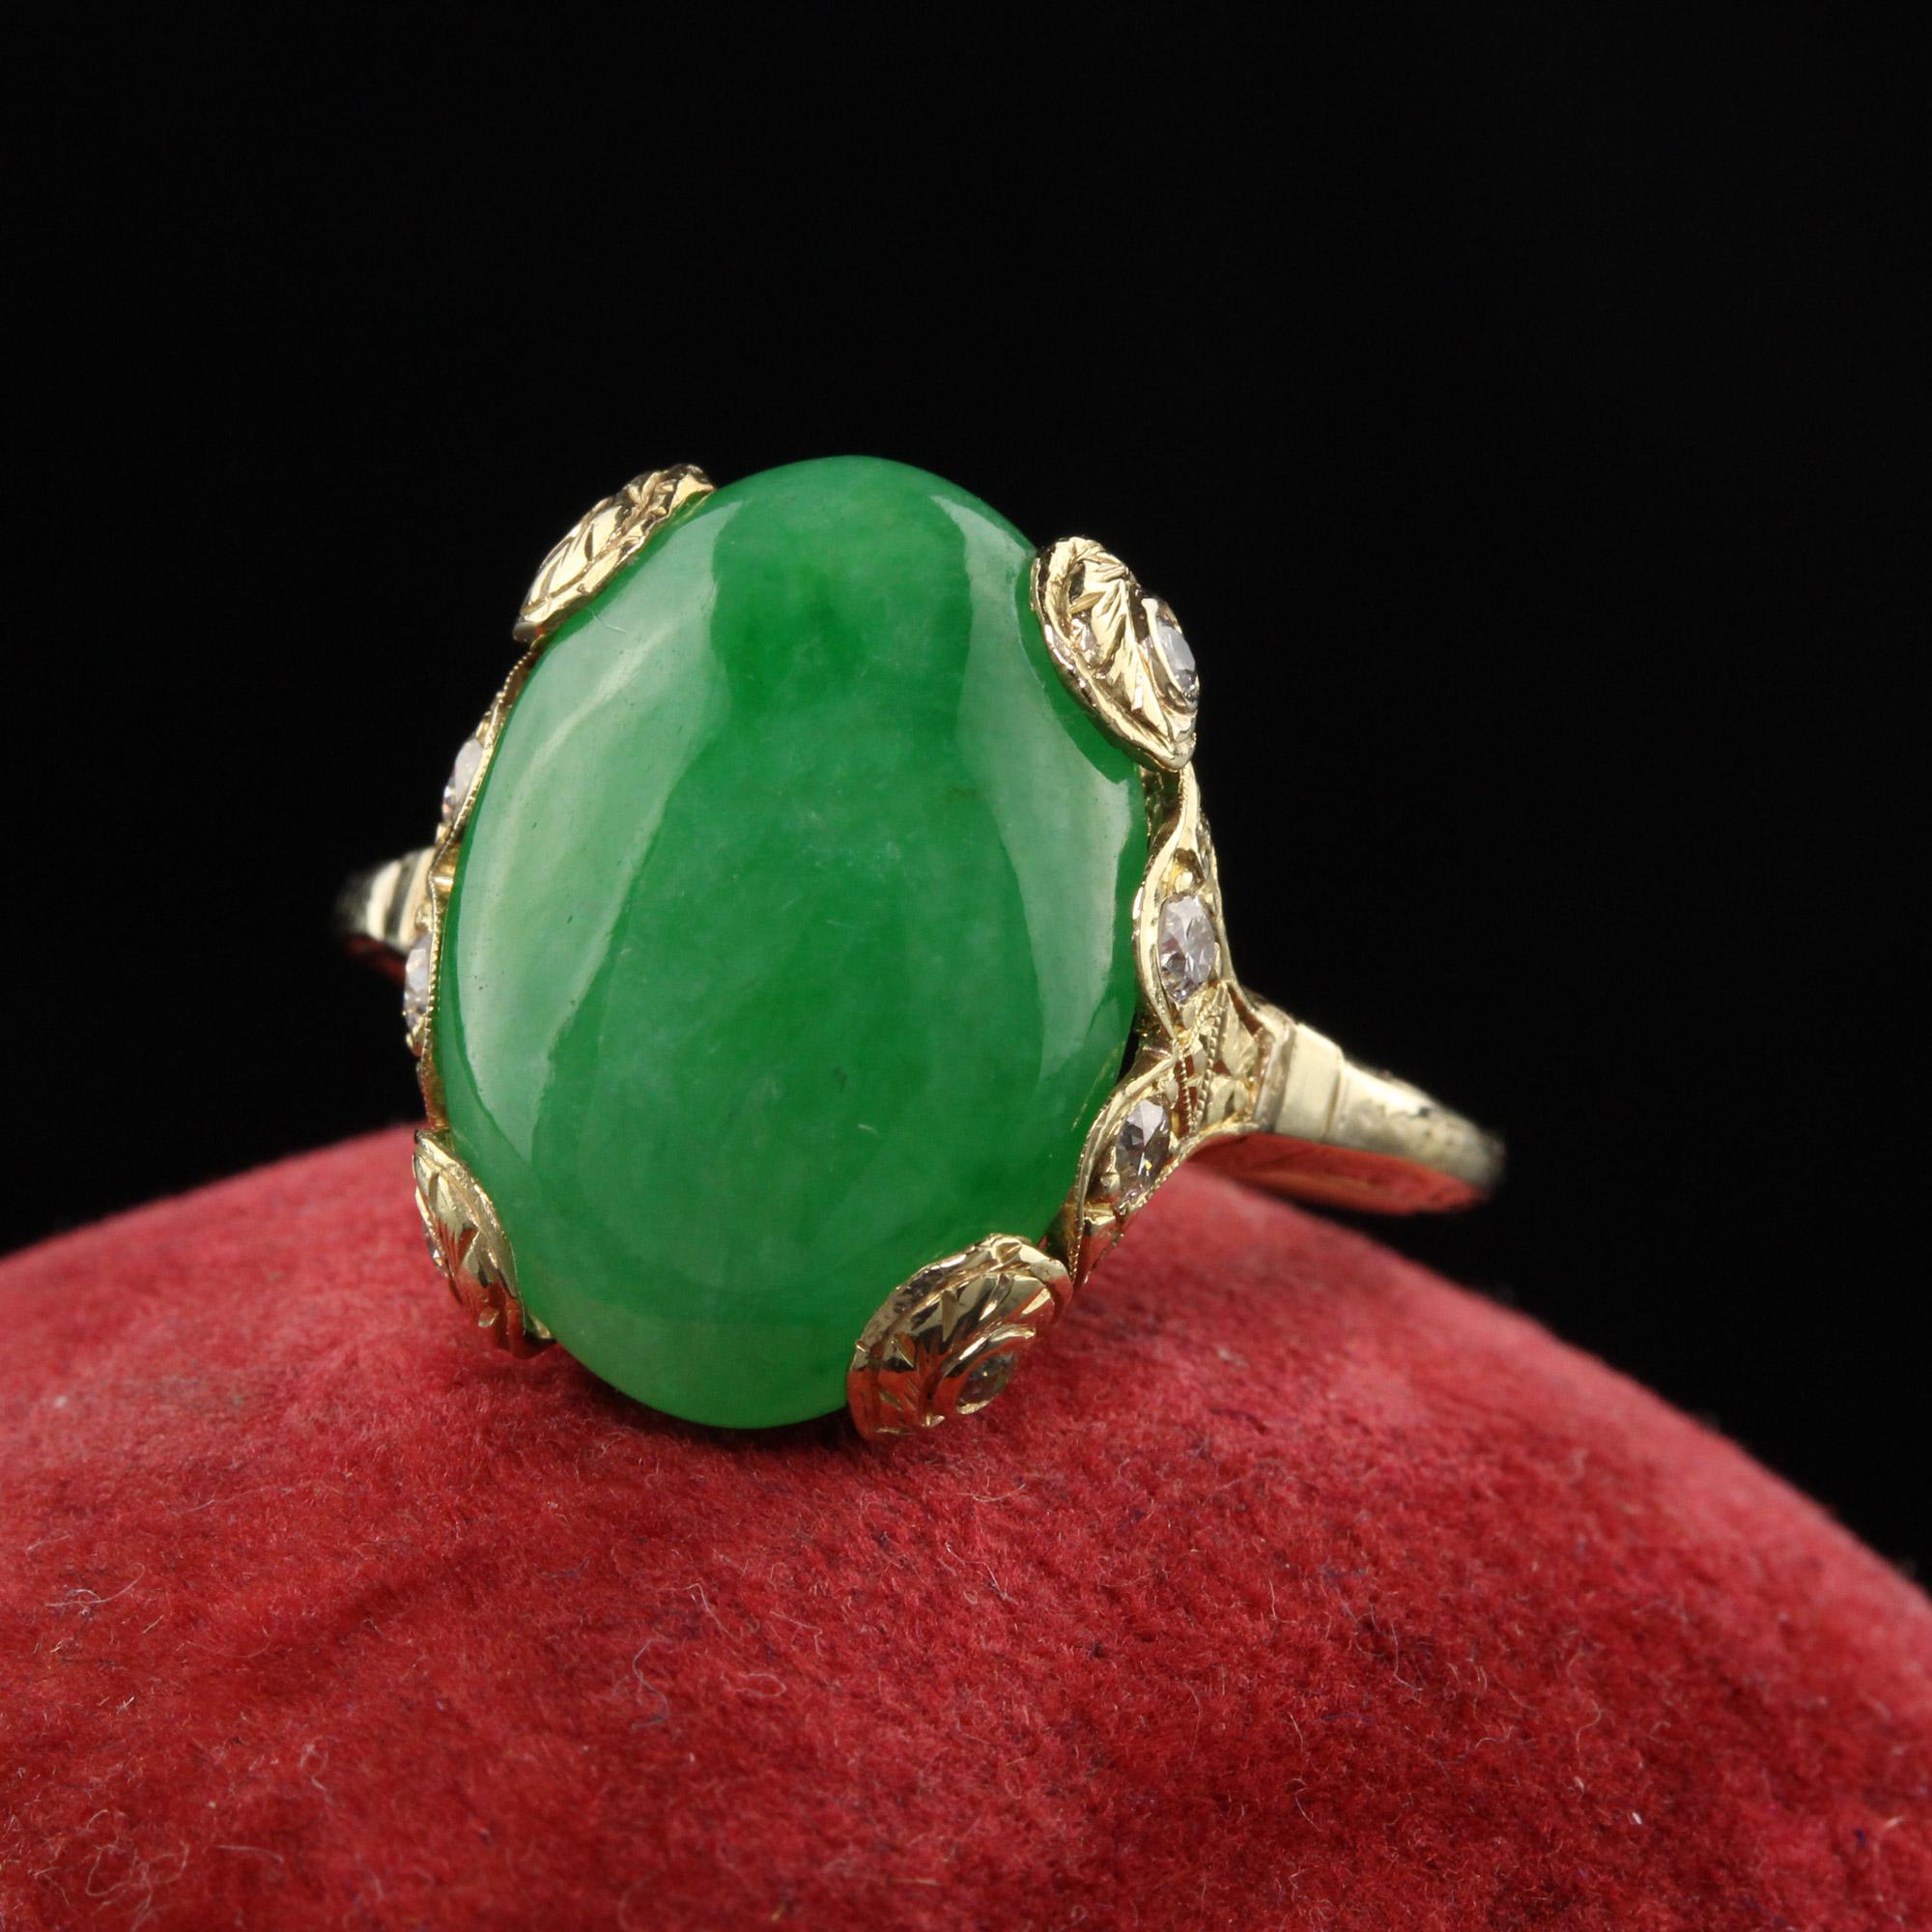 Beautiful Antique Art Deco 18K Yellow Gold Cabochon Jade and Old European Diamond Ring. This incredible ring has a large jade in the center of an engraved ring with old european cut diamonds set on the mounting.

Item #R0989

Metal: 18K Yellow